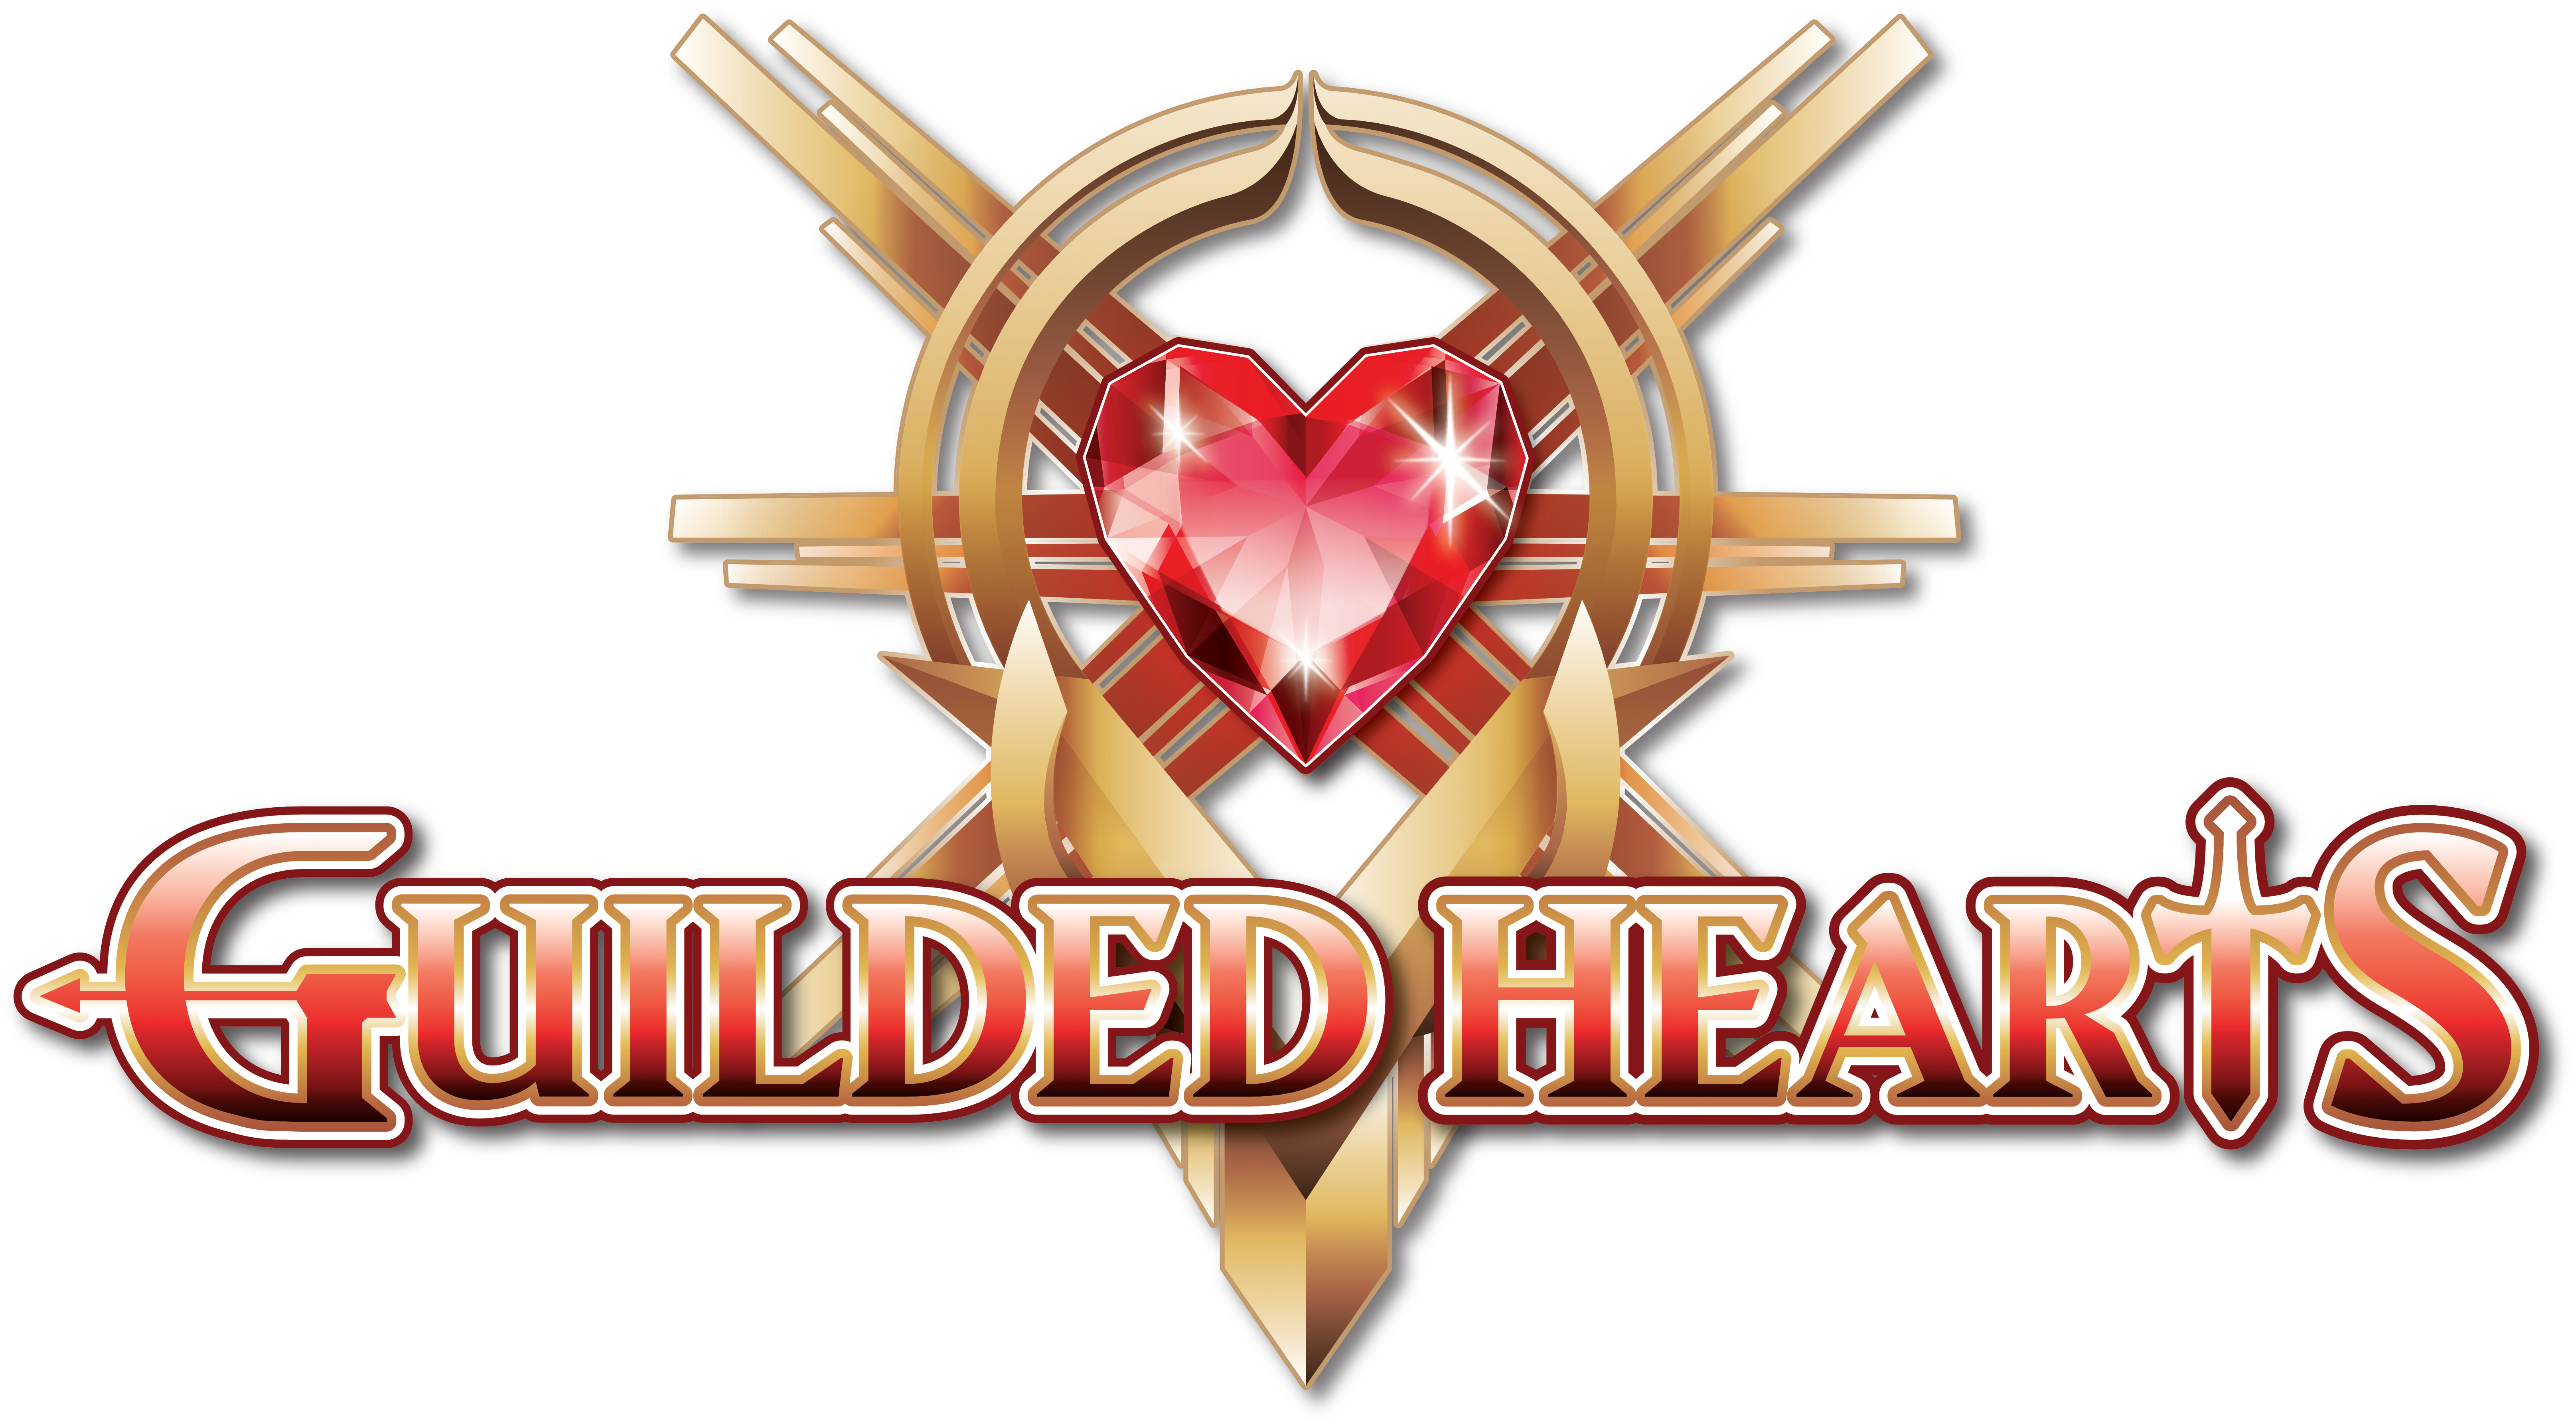 Guilded Hearts logo